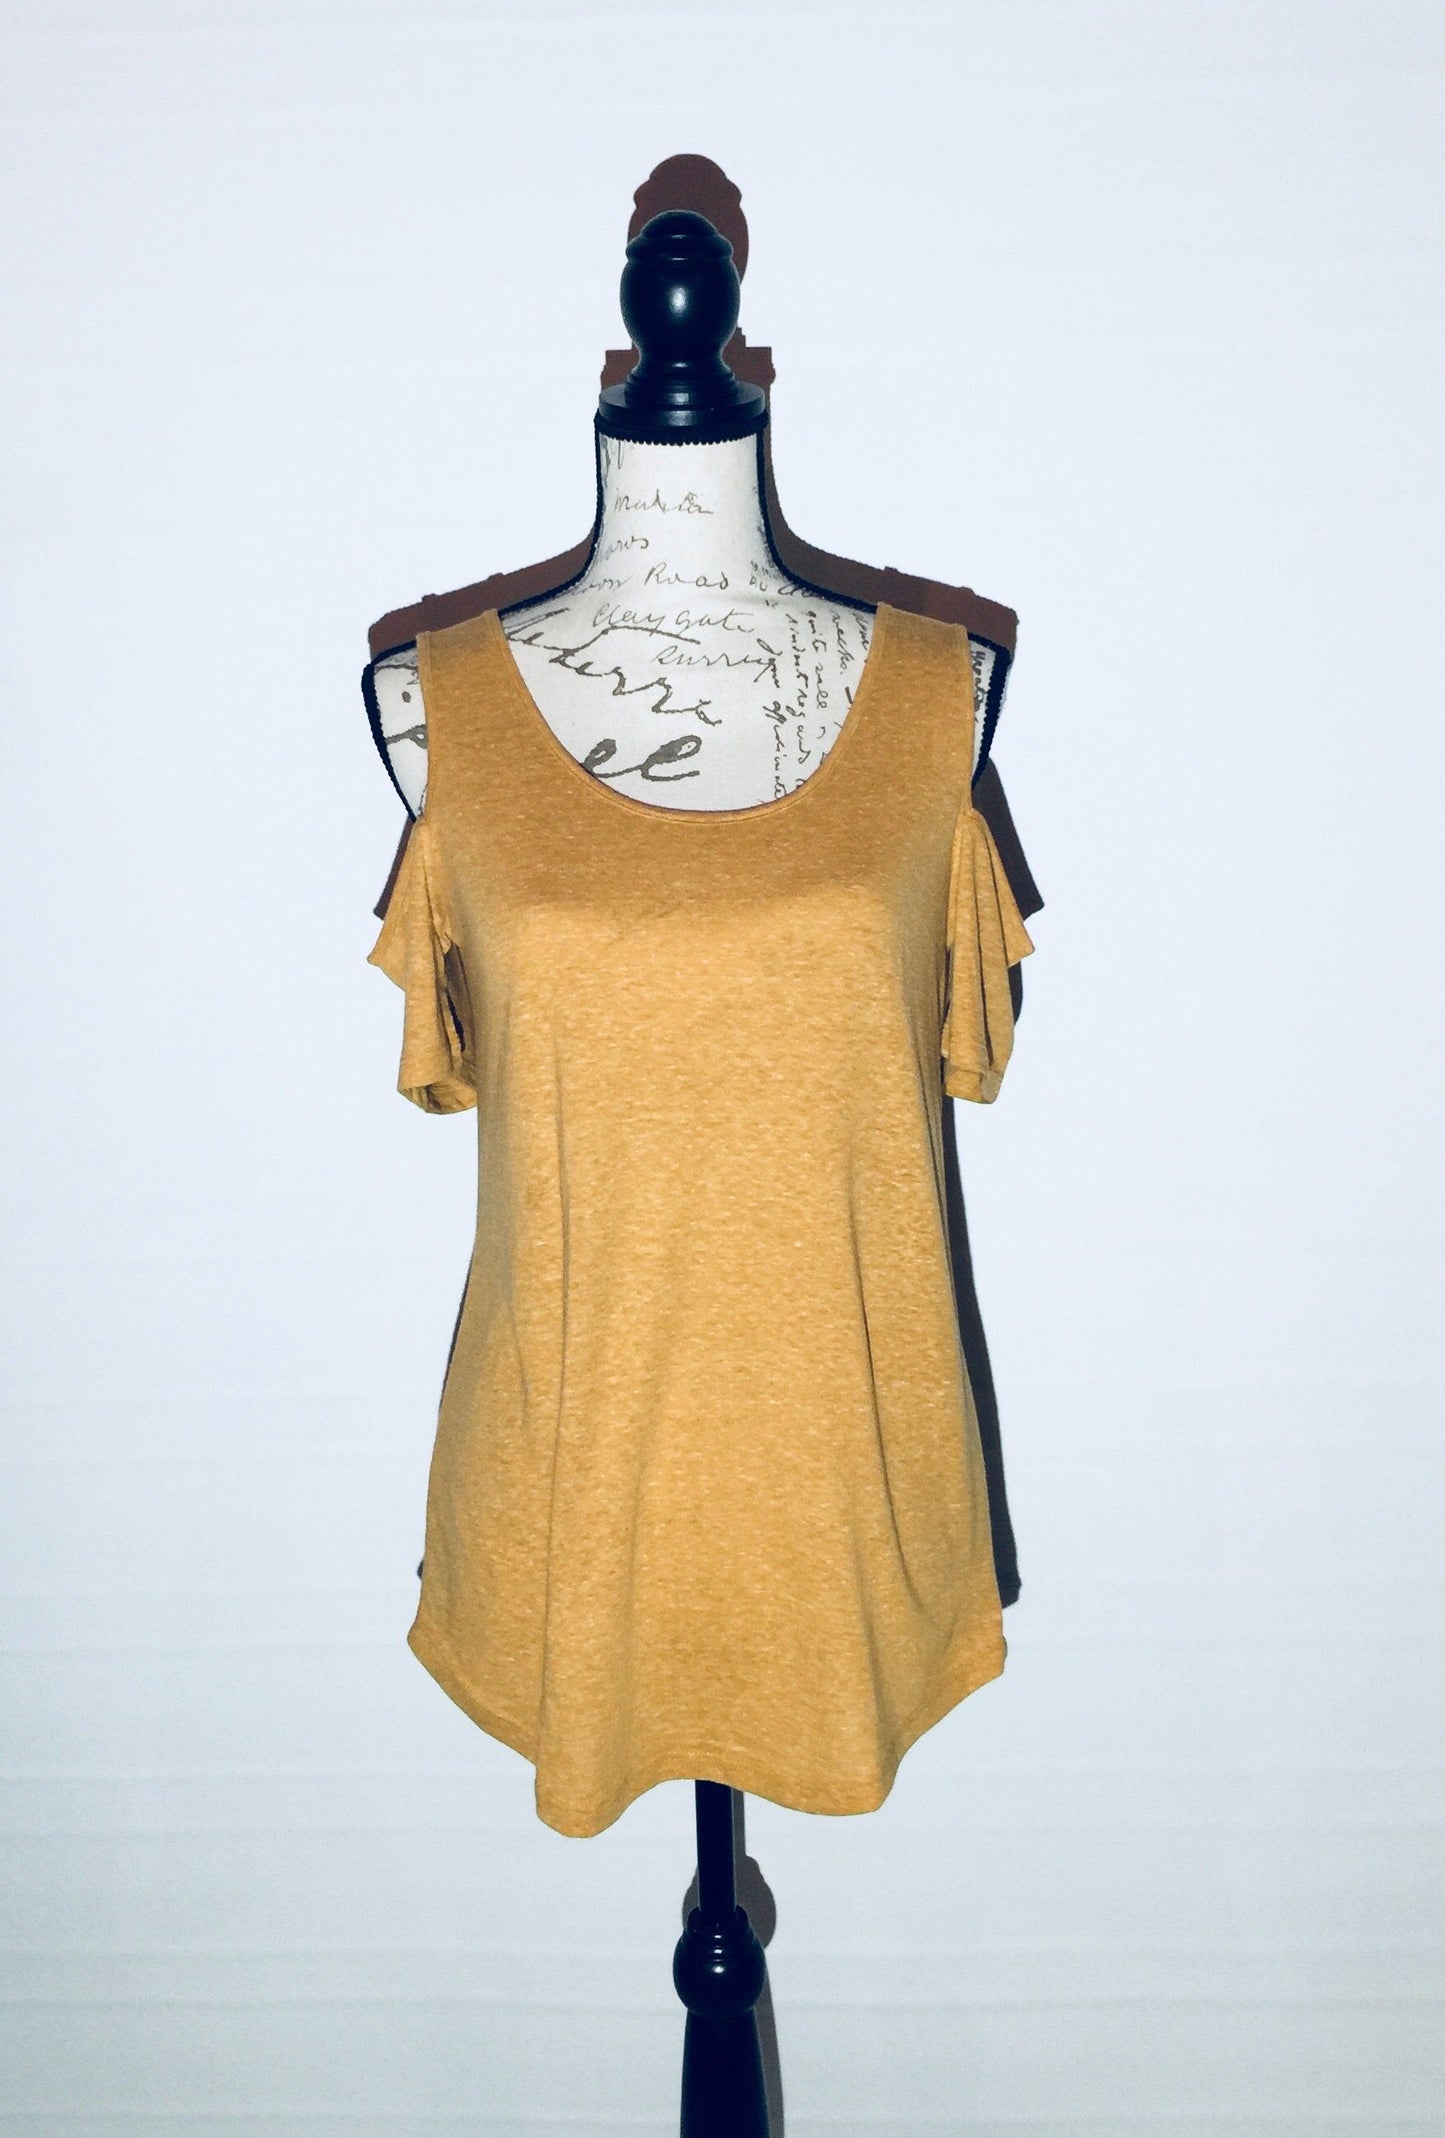 50% Off Women's Cold Shoulder Summer Top Yellow: S/M/L Tunics MomMe and More 